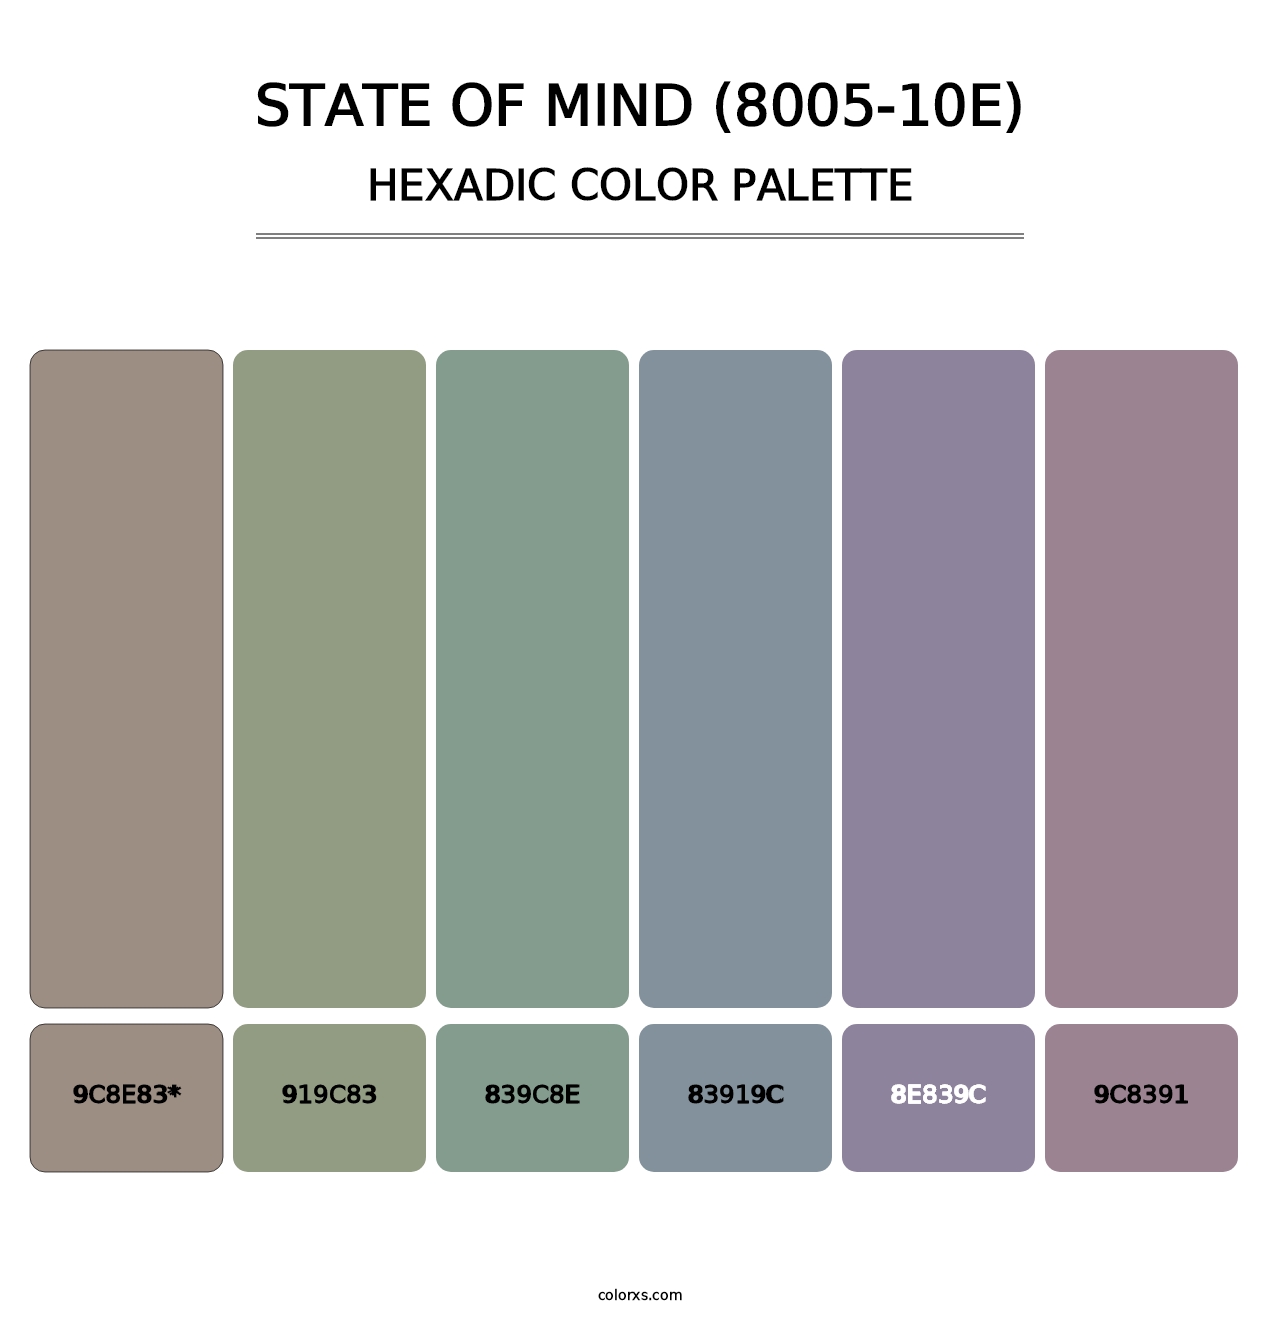 State of Mind (8005-10E) - Hexadic Color Palette